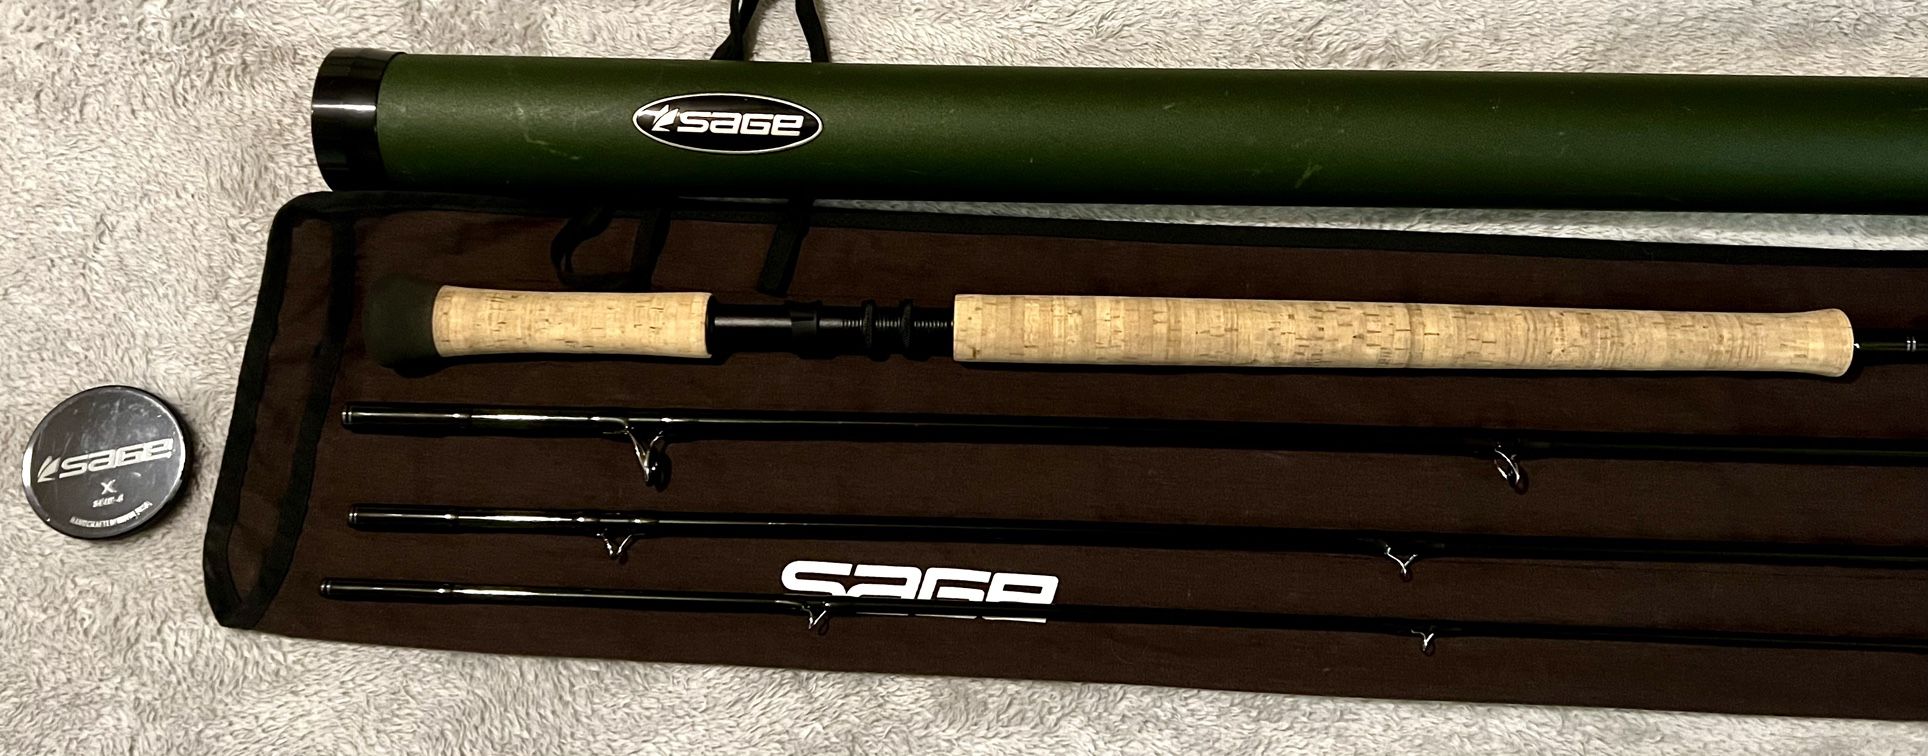 Sage X 8140-4 Spey Fly Rod for Sale in Seattle, WA - OfferUp